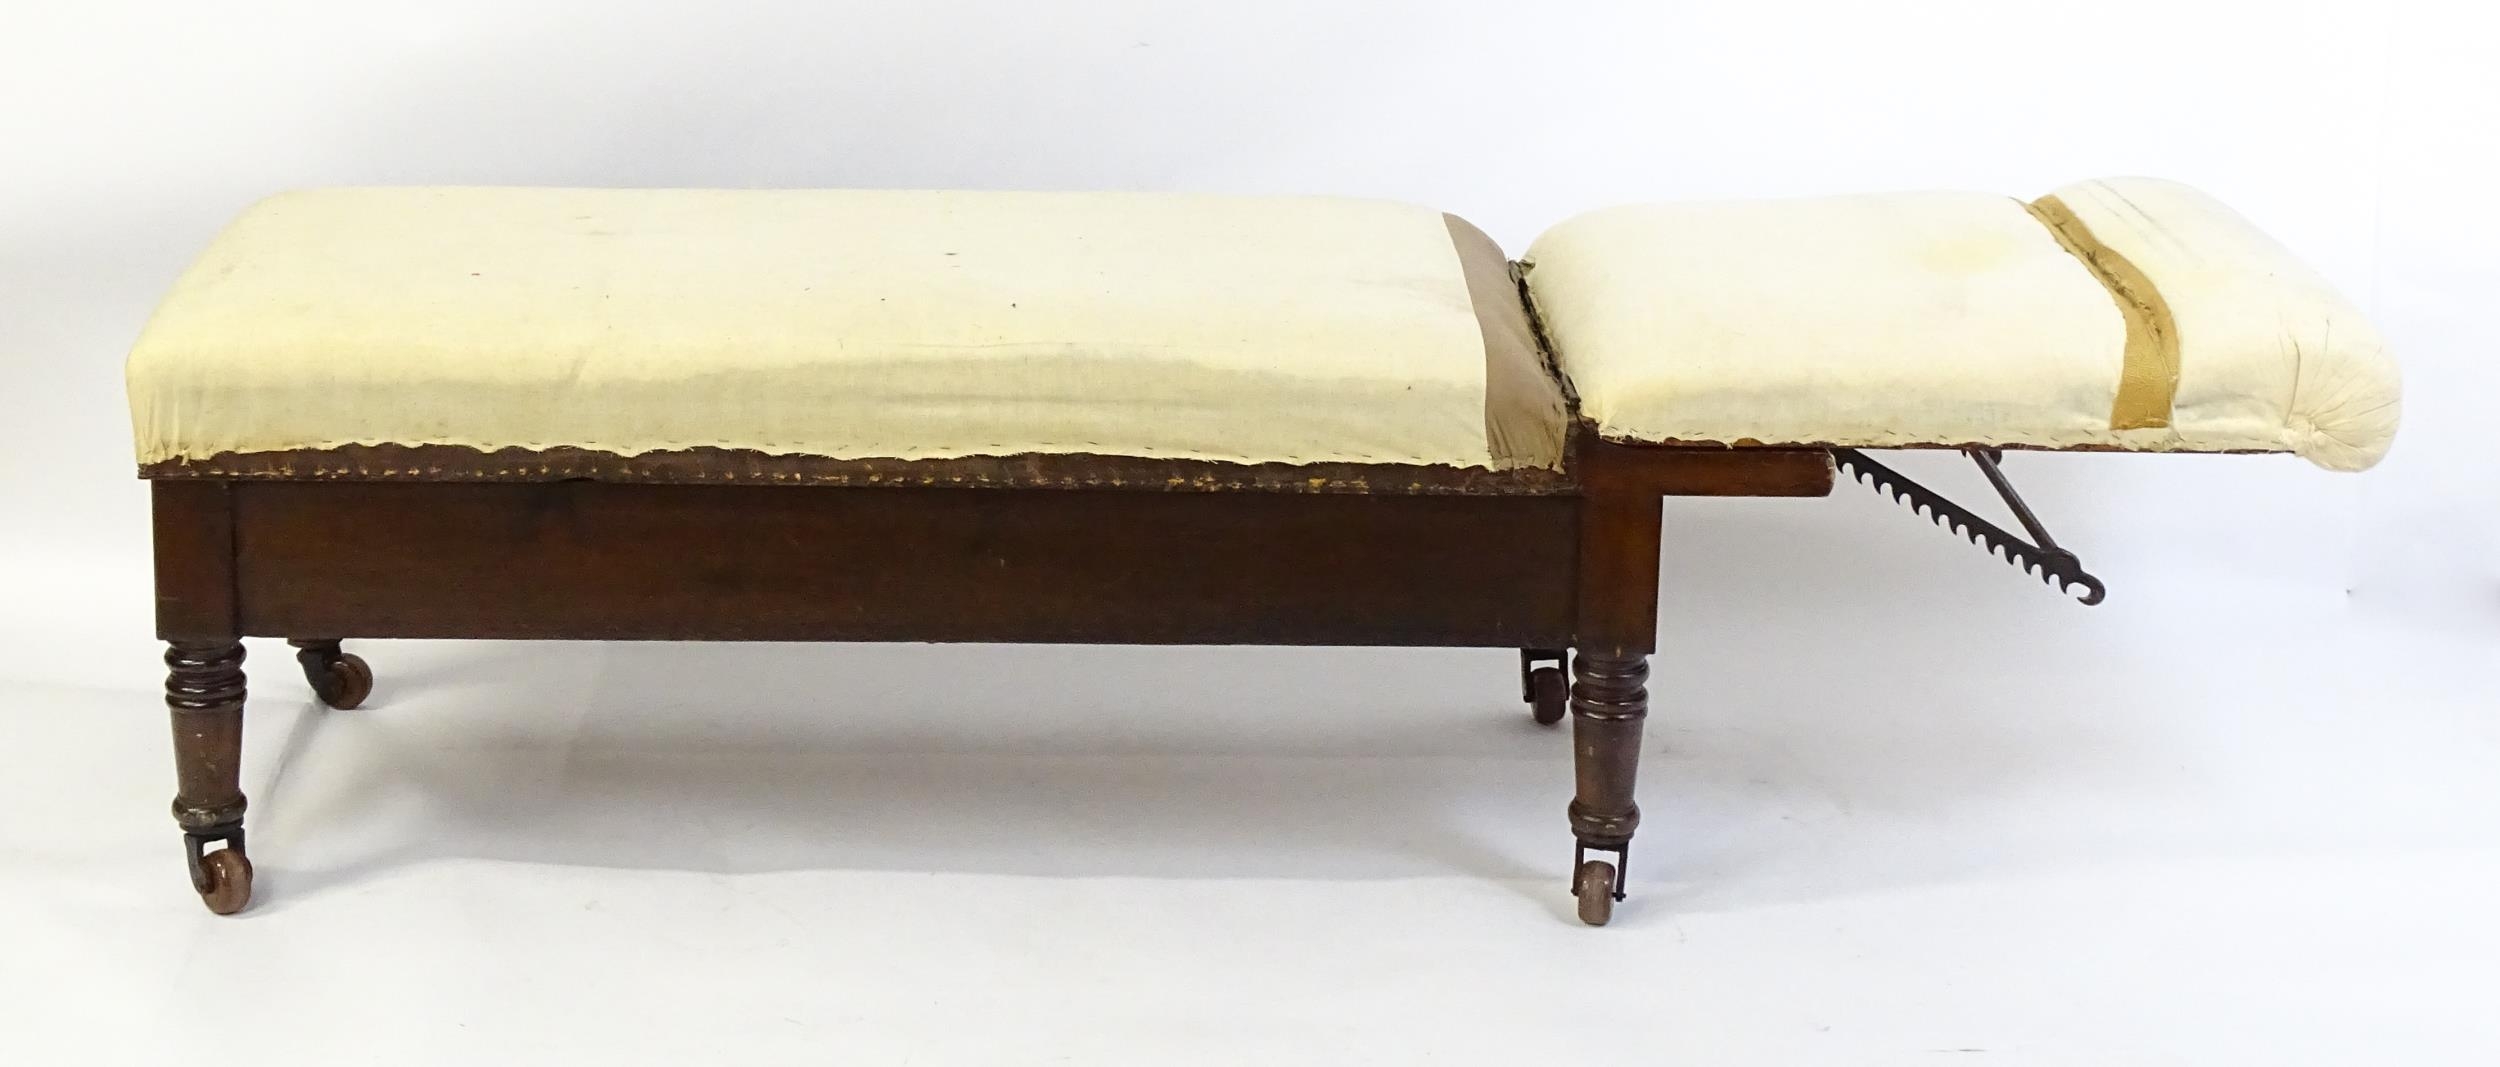 A Victorian 'Carters Literary Machine' day bed with an adjustable backrest above two short drawers - Image 10 of 10